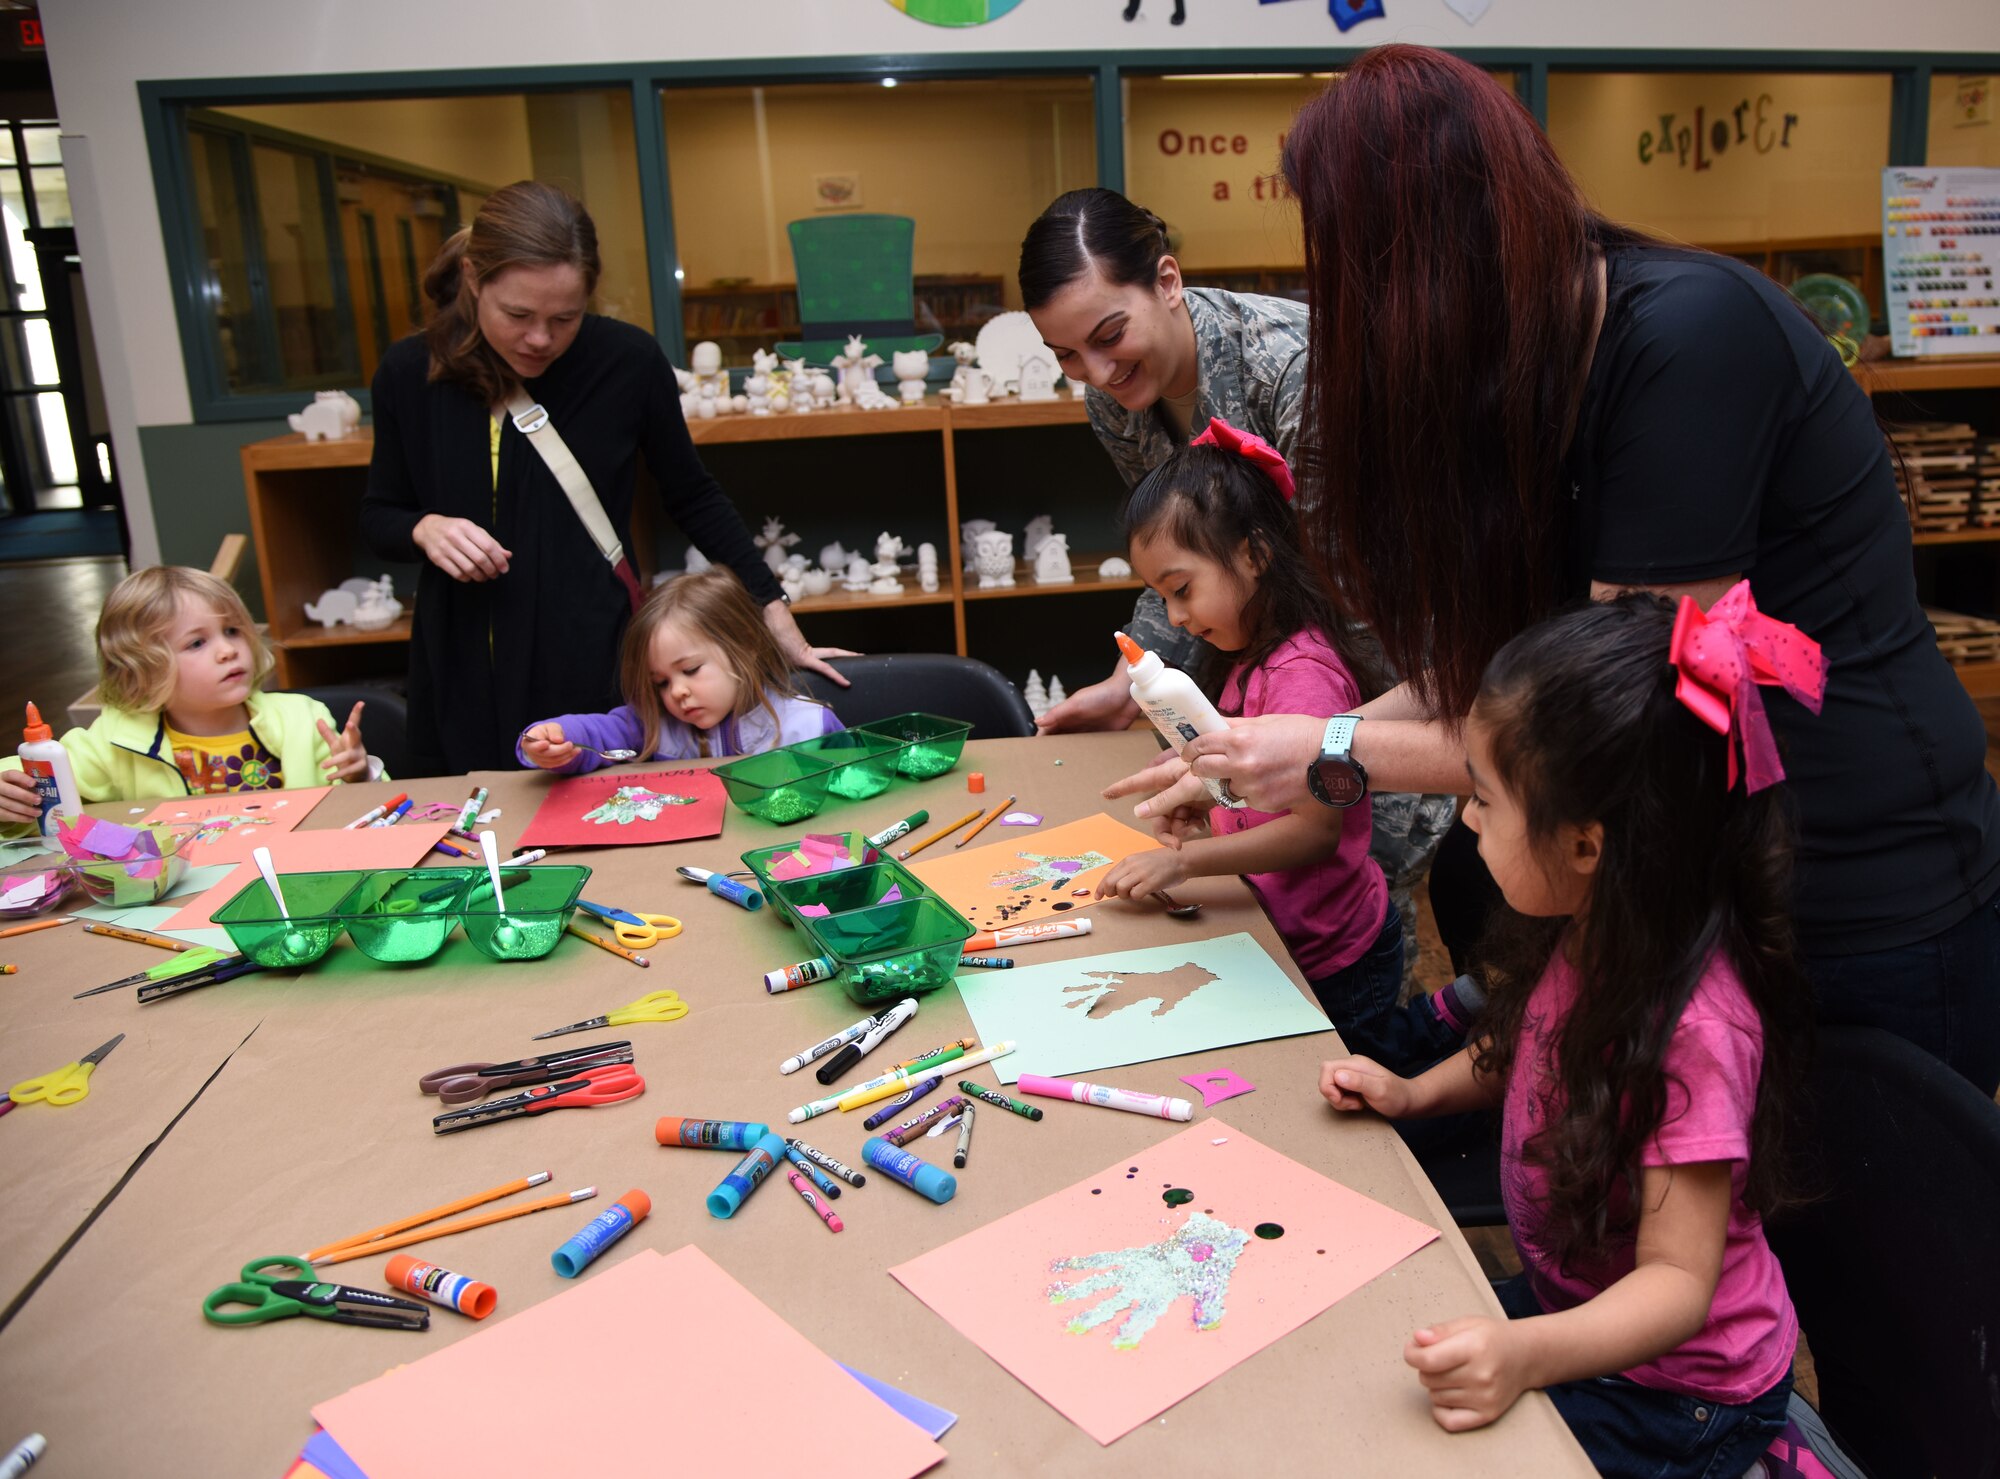 Keesler children and their mothers decorate a hand cut-out during an arts and crafts session at the McBride Commons March 21, 2018, on Keesler Air Force Base, Mississippi. Keesler children and their mothers attended the event which was held in recognition of Women’s History Month. A luncheon will also be held to remember women’s history March 27 at the Bay Breeze Event Center. (U.S. Air Force photo by Kemberly Groue)